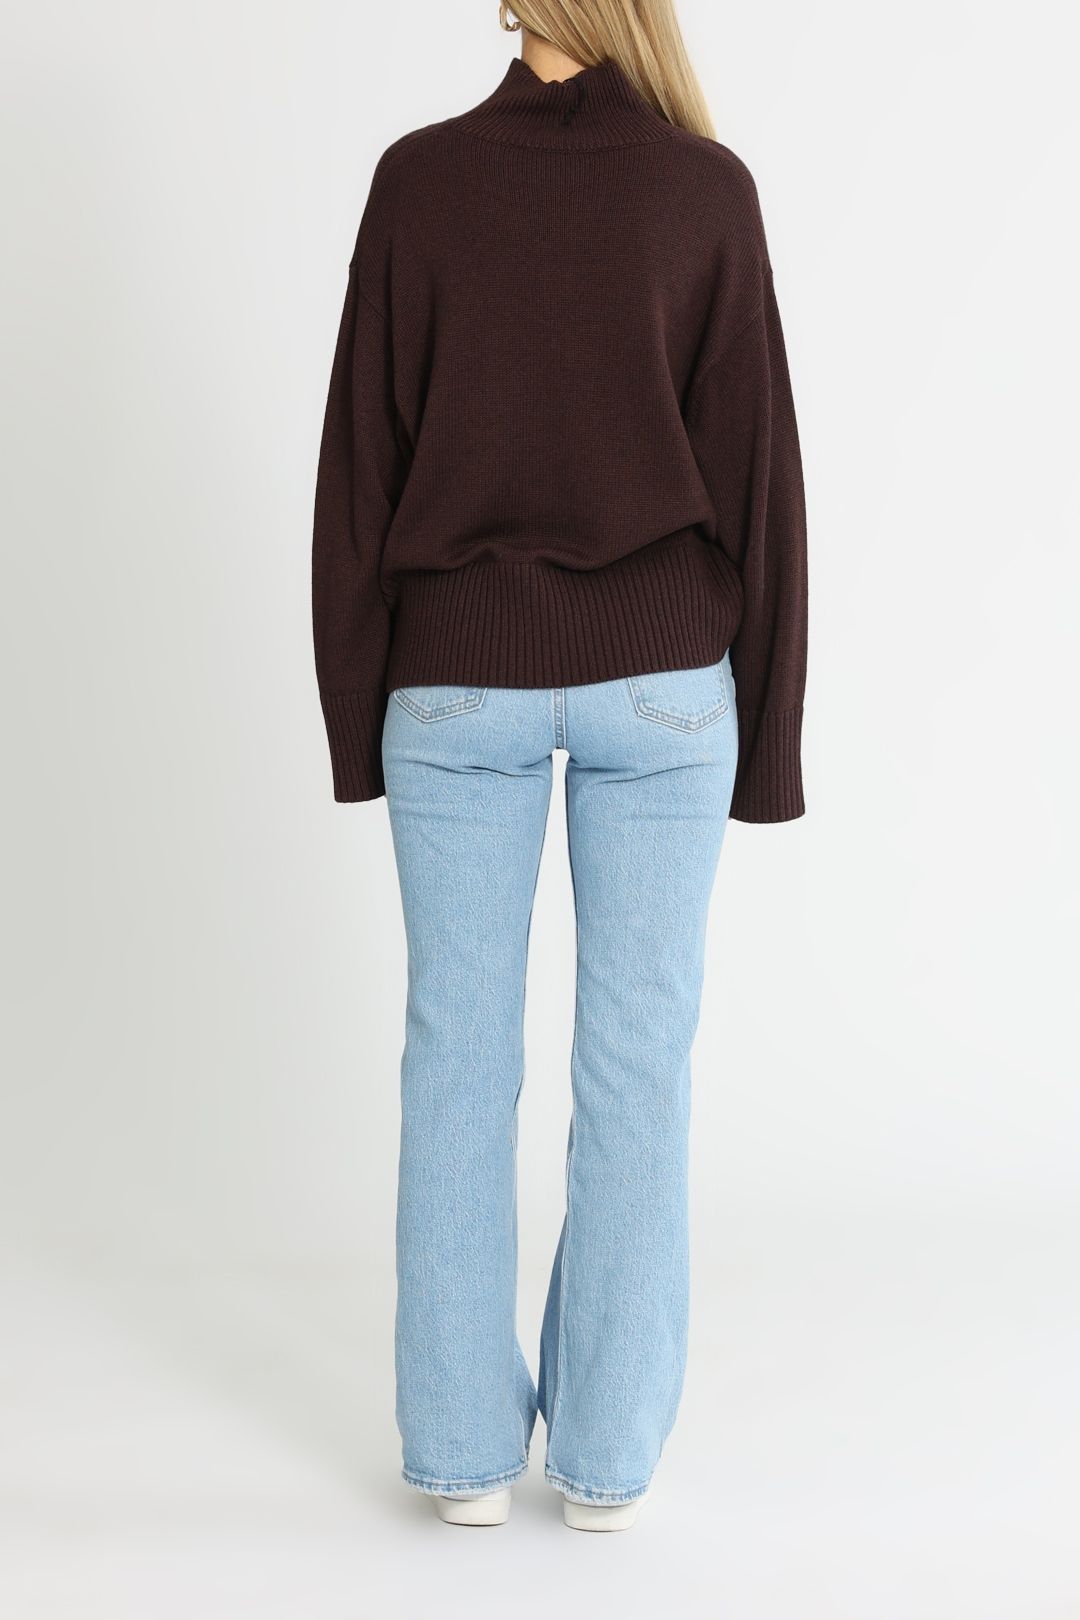 C&M Camilla and Marc Van Turtleneck Chocolate Relaxed Fit